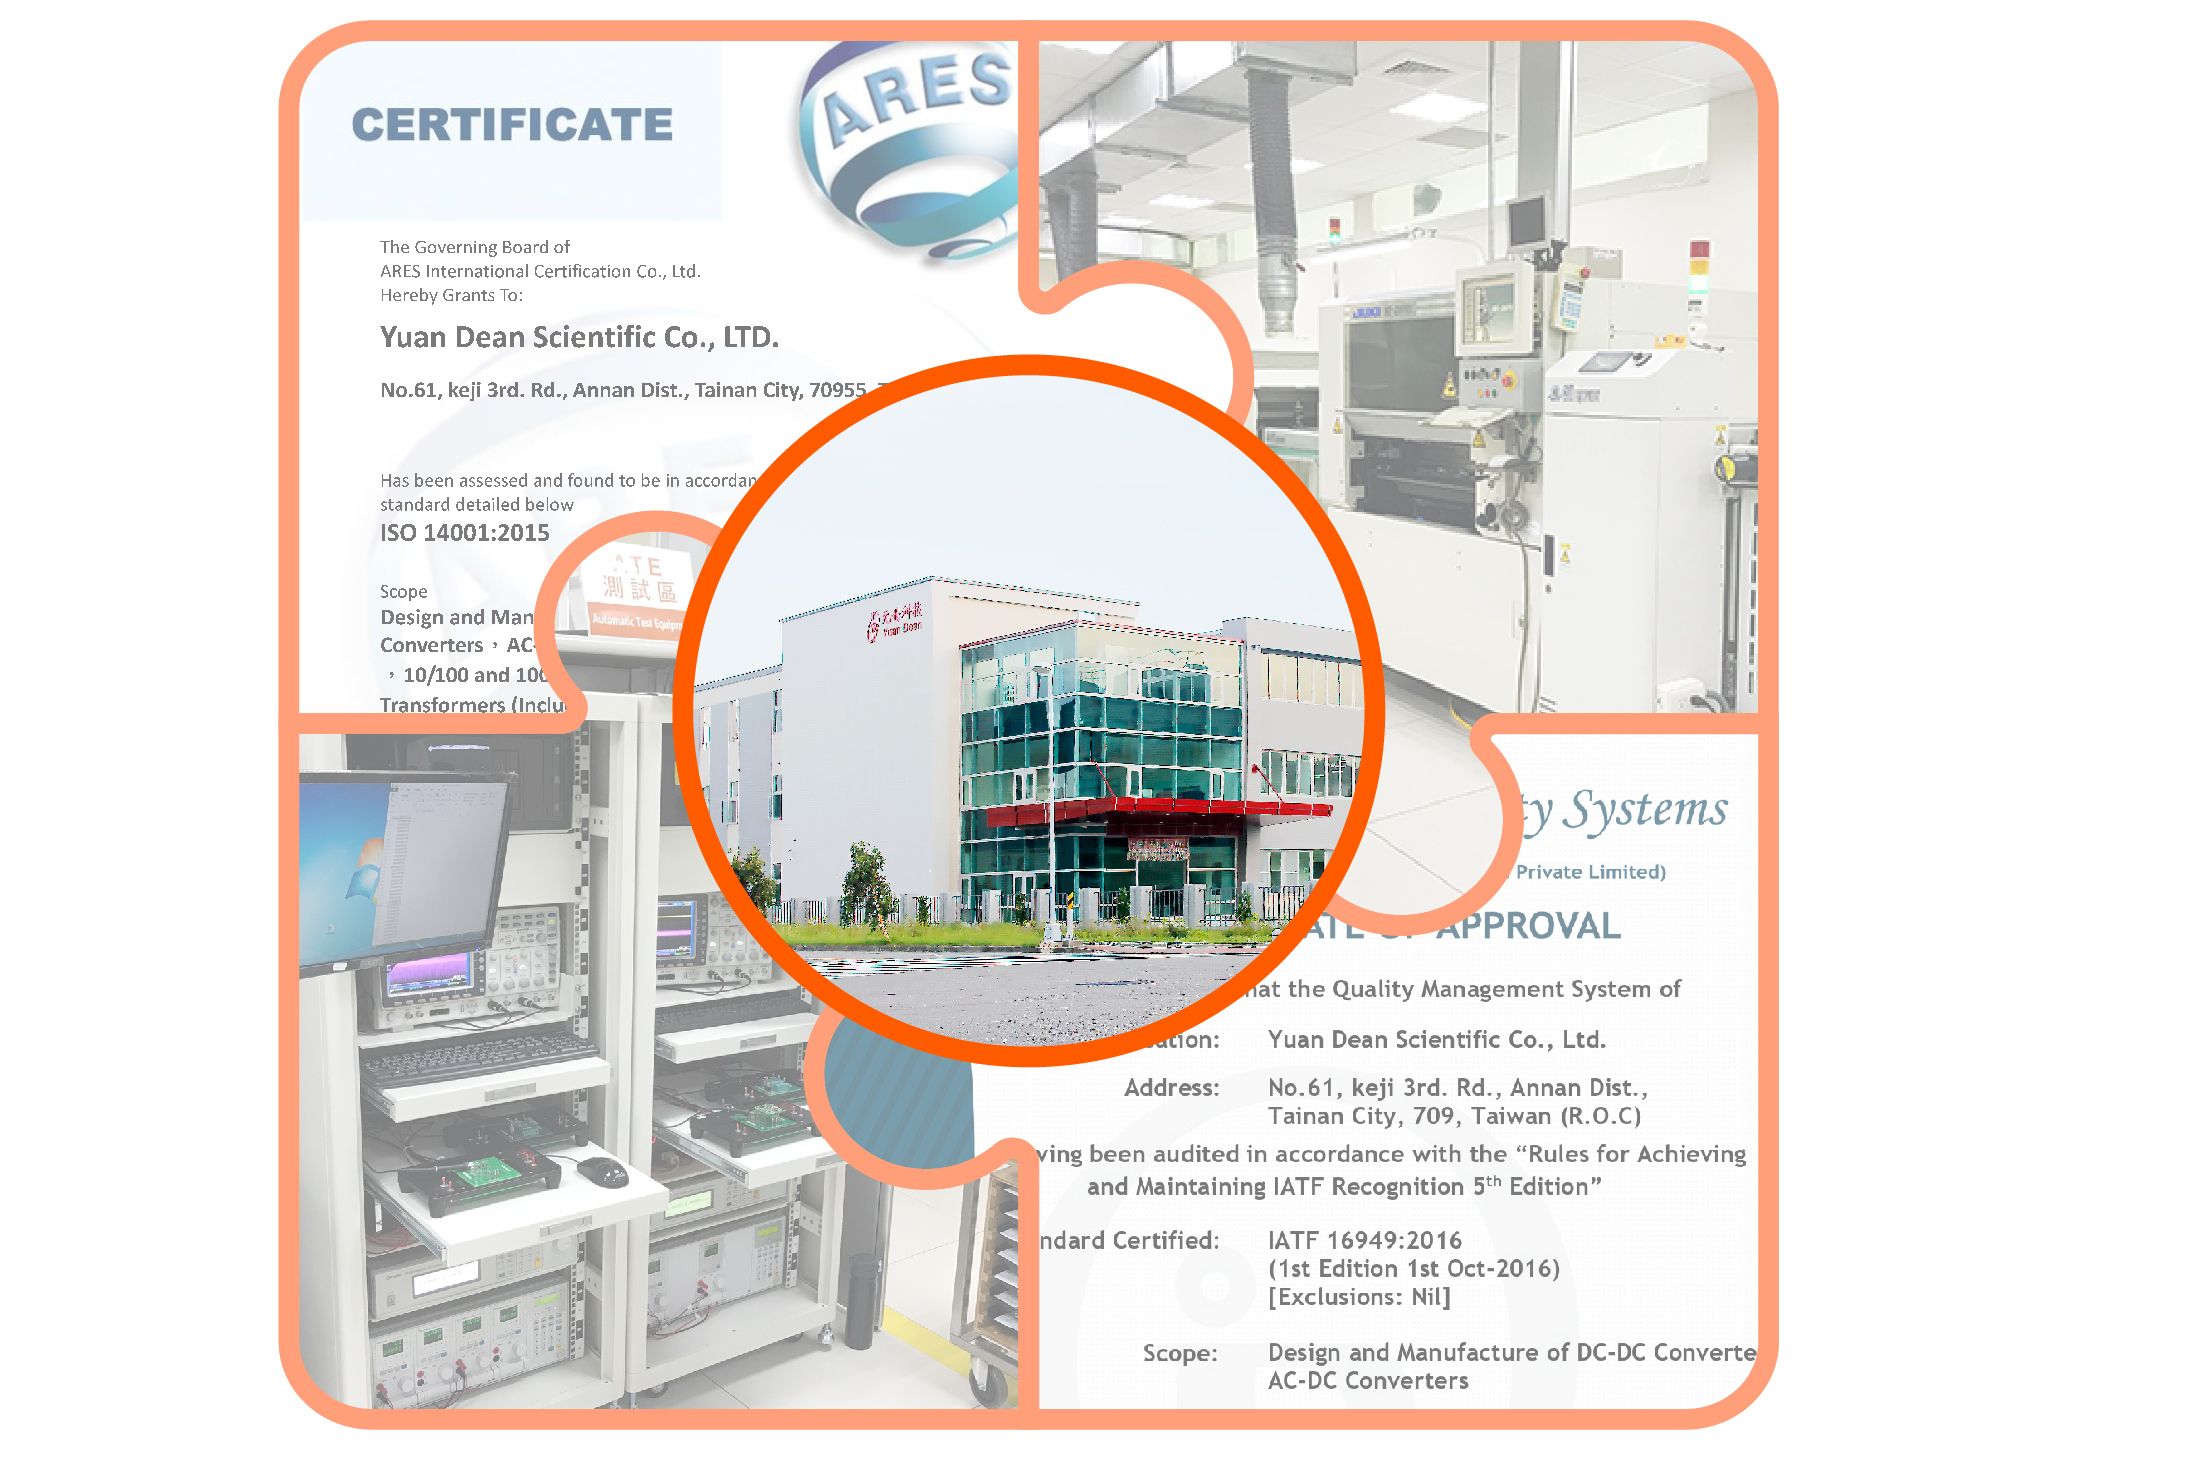 Yuan Dean's electronic components have passed various certifications